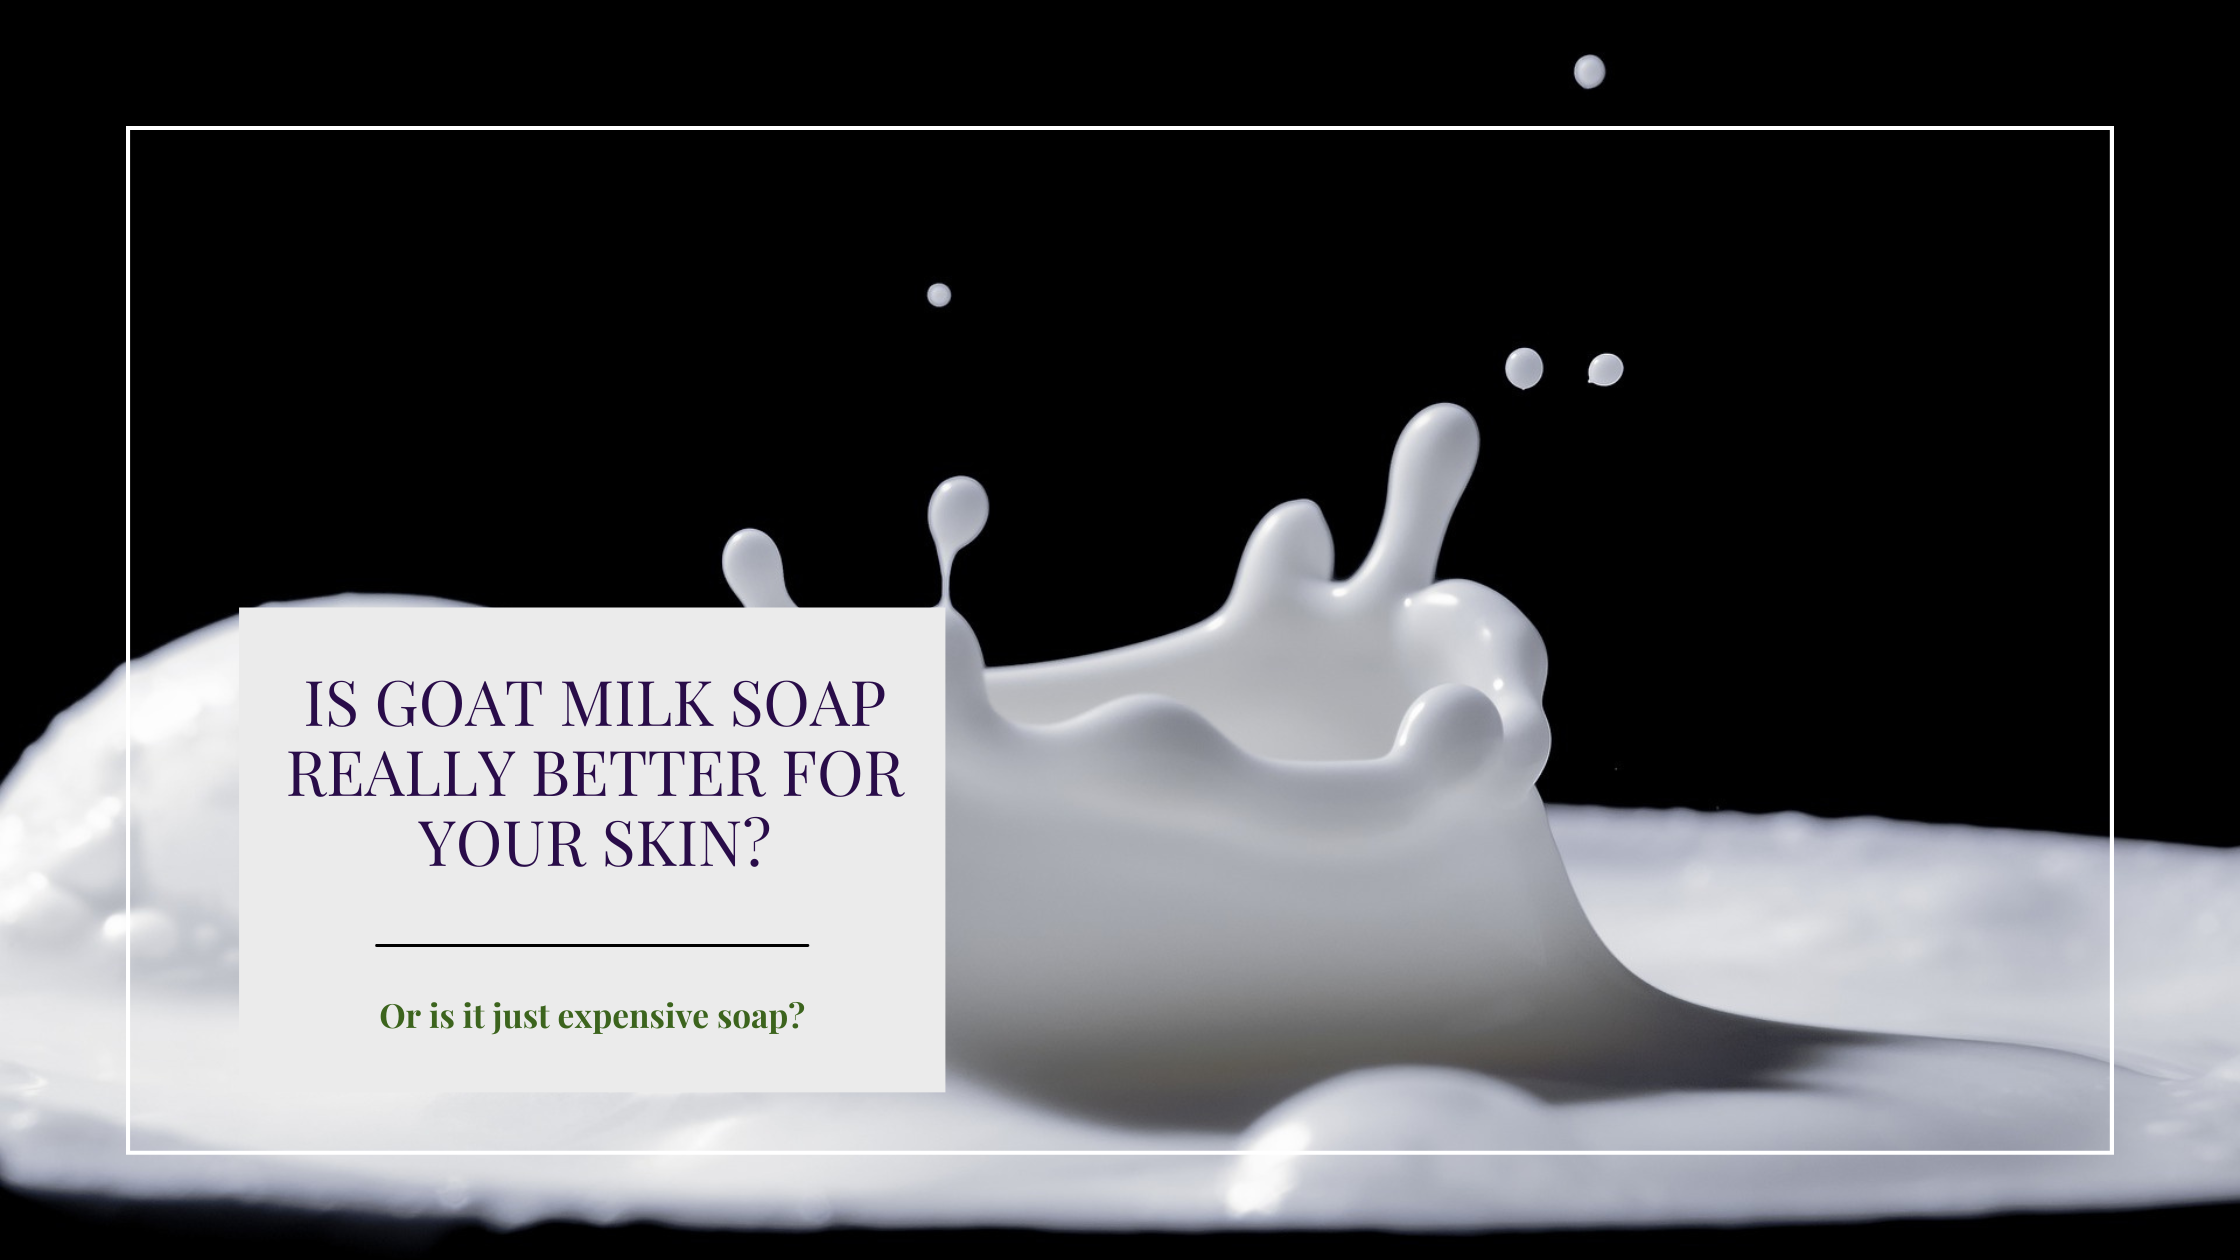 A milk dropped splashed into a puddle of milk against a back background with text indicating the title of the article